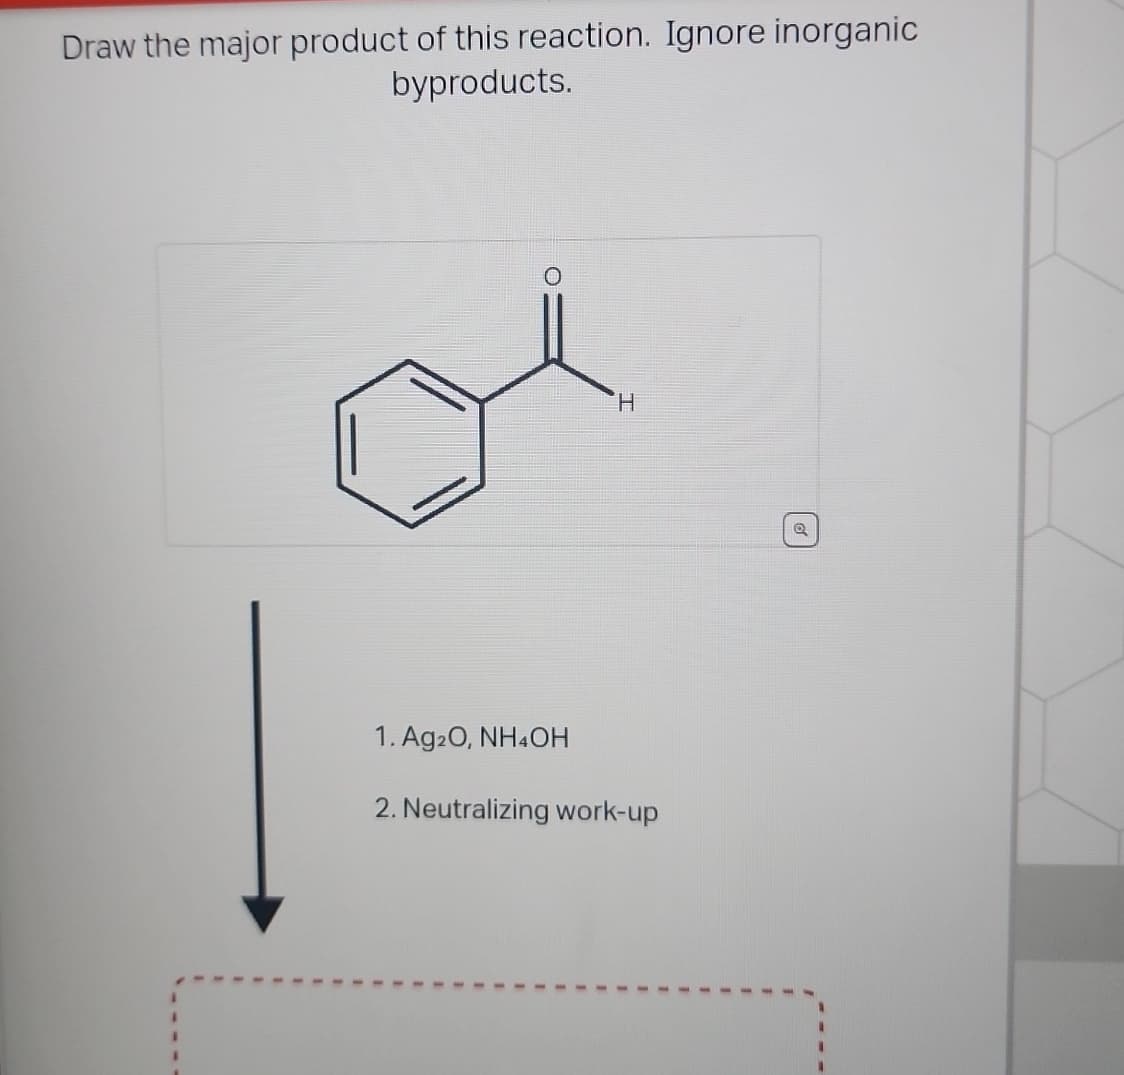 Draw the major product of this reaction. Ignore inorganic
byproducts.
H
1. Ag2O, NH4OH
2. Neutralizing work-up
Q